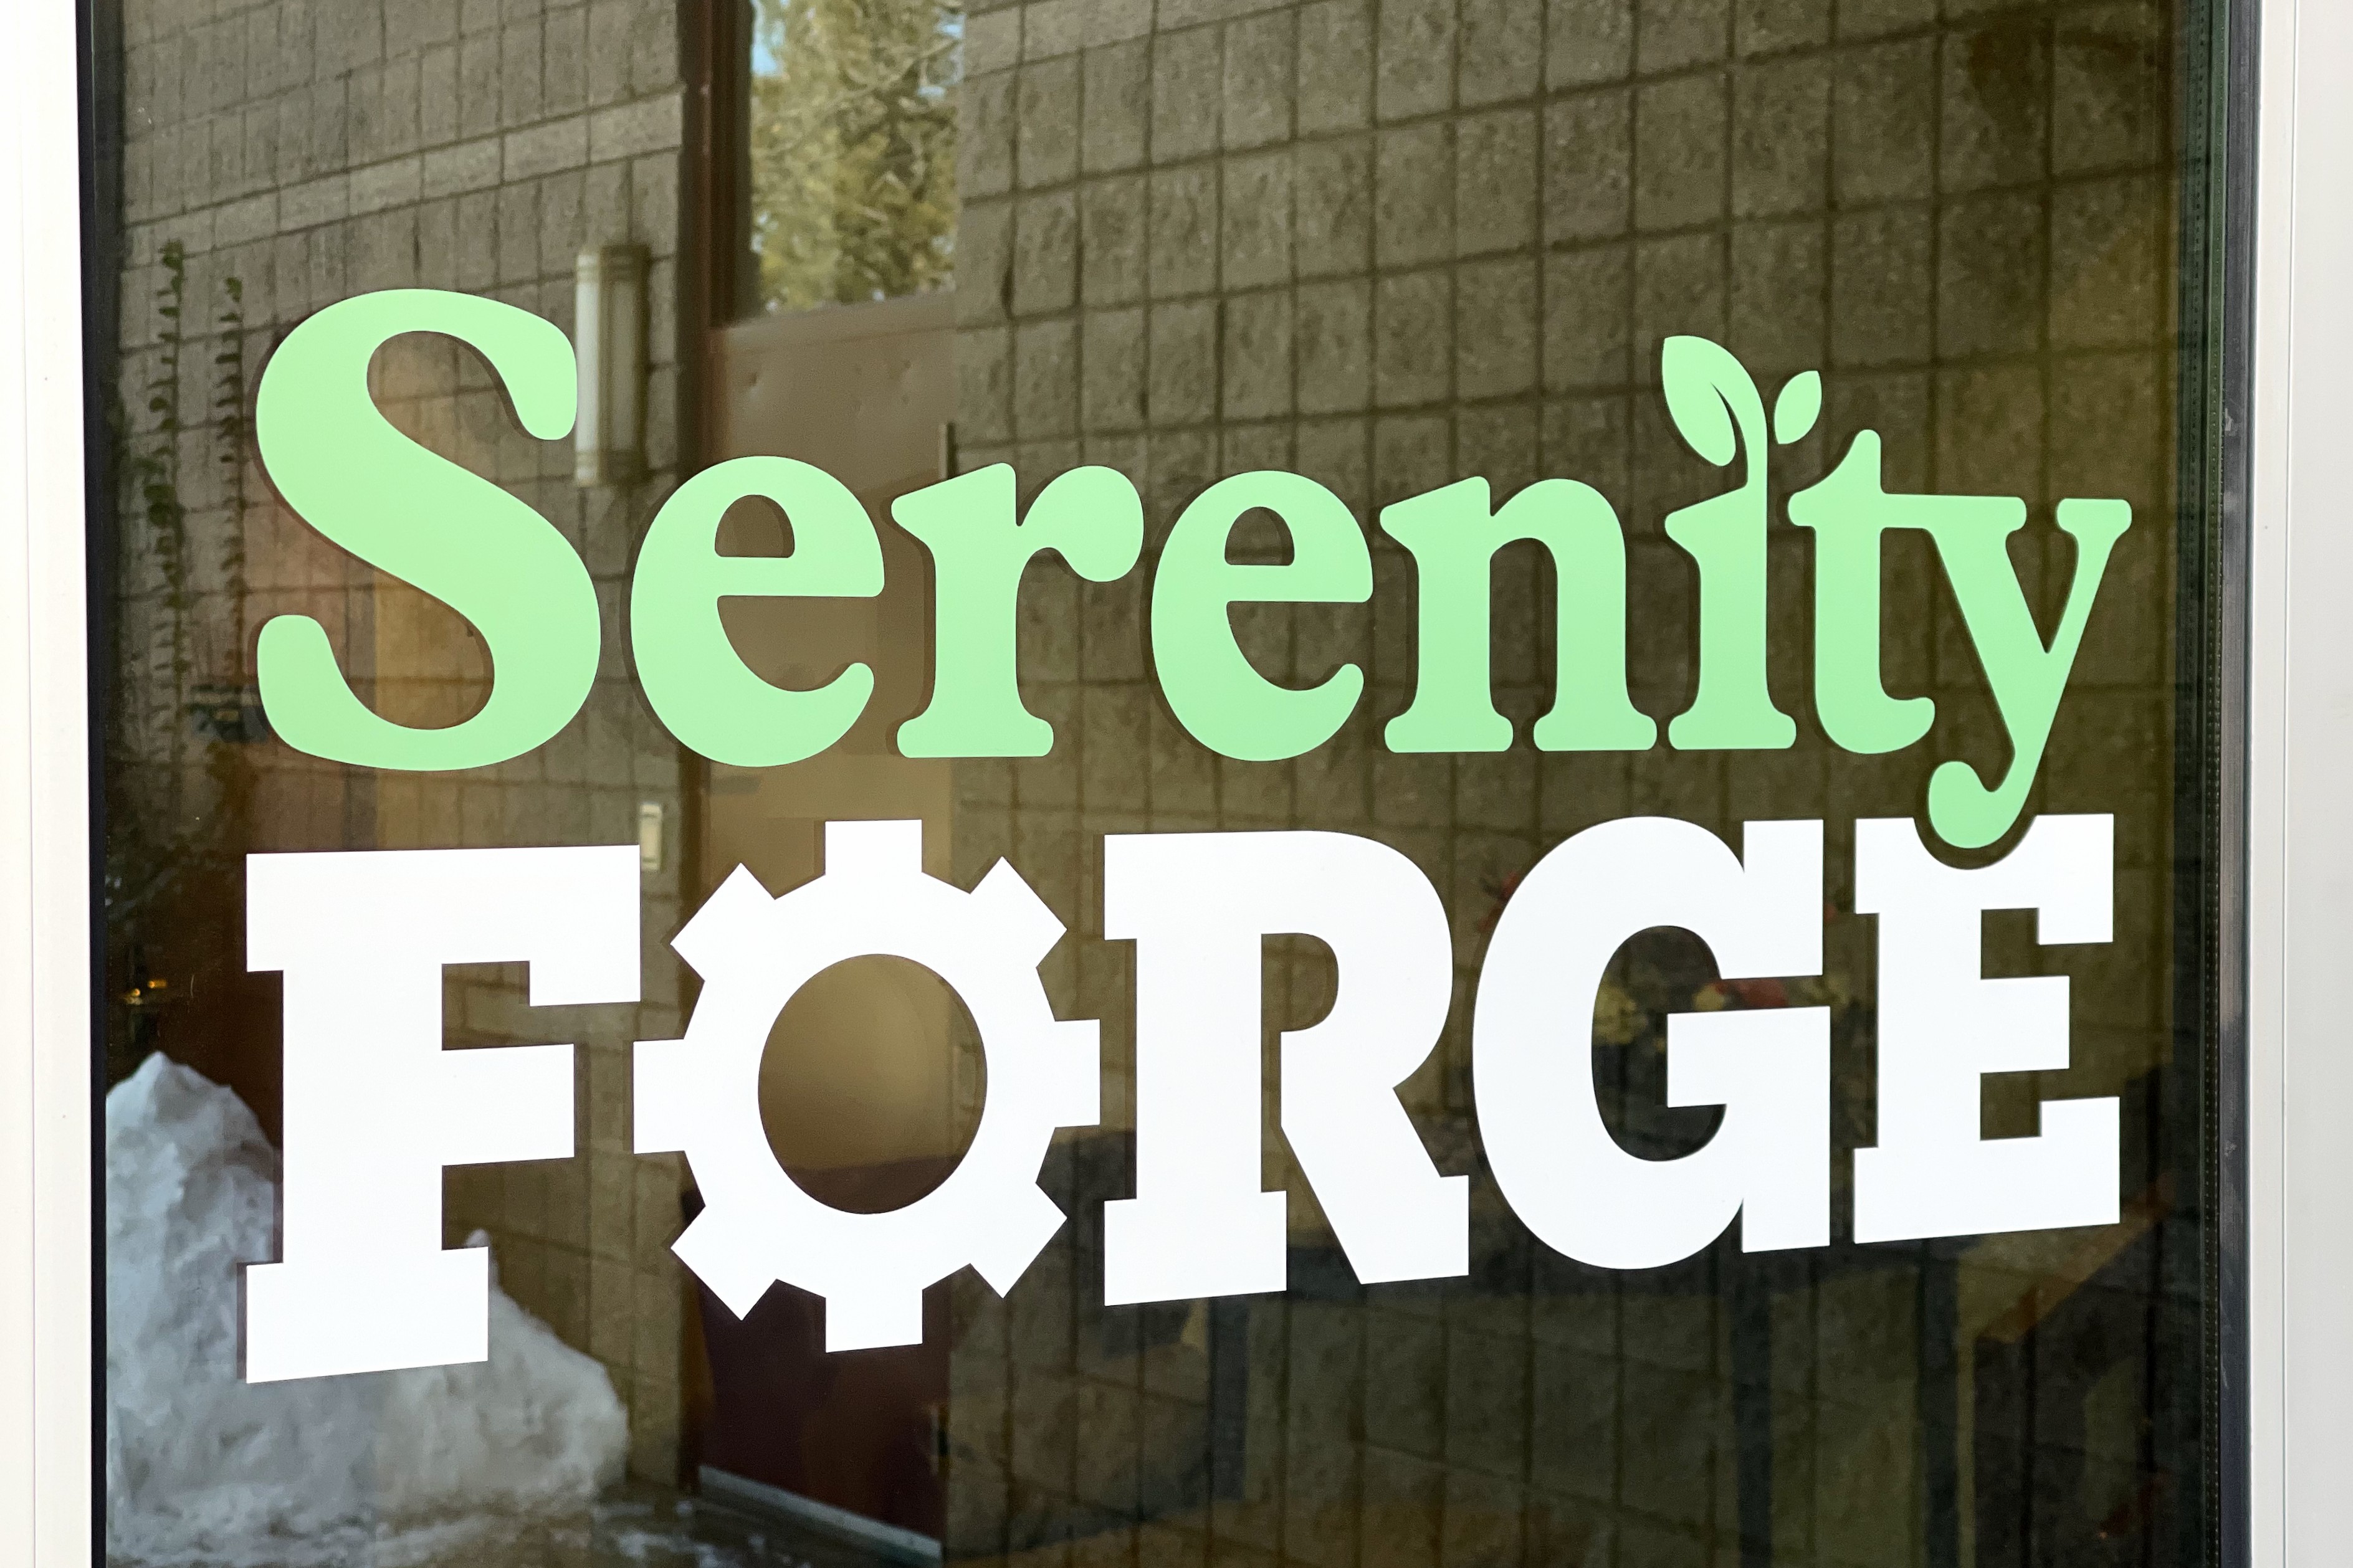 Serenity Forge